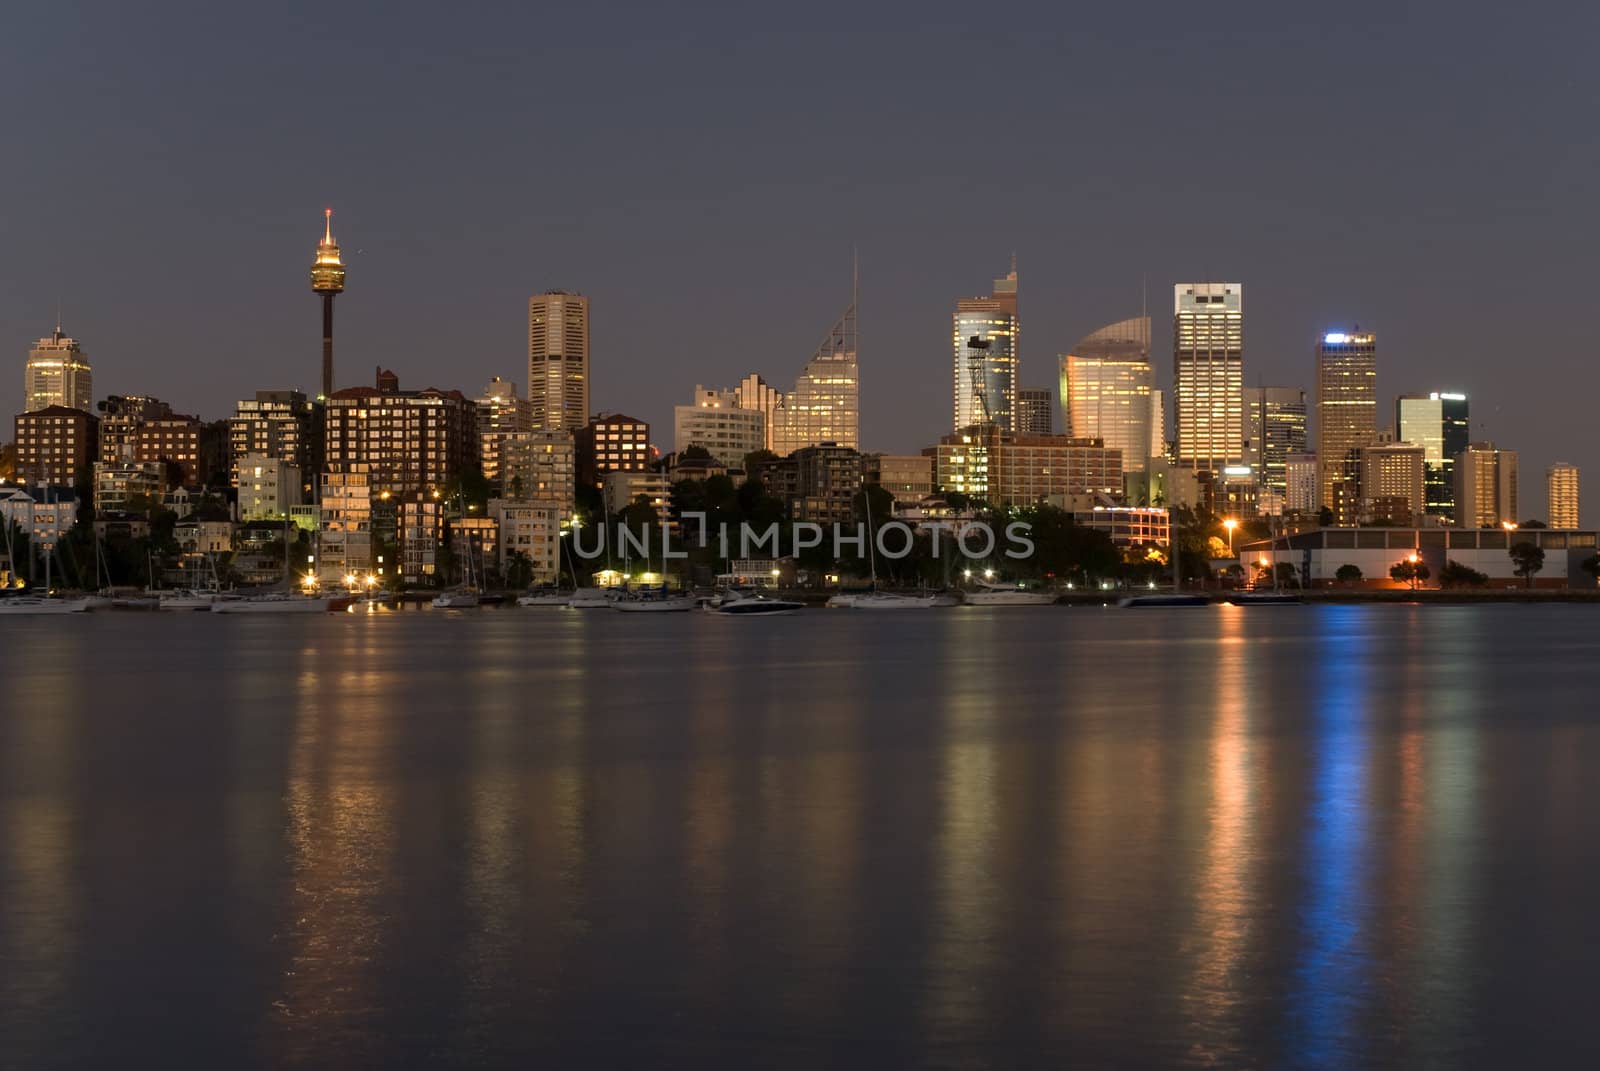 Australia, Sydney seafront with sky-scrapers, yachts at night